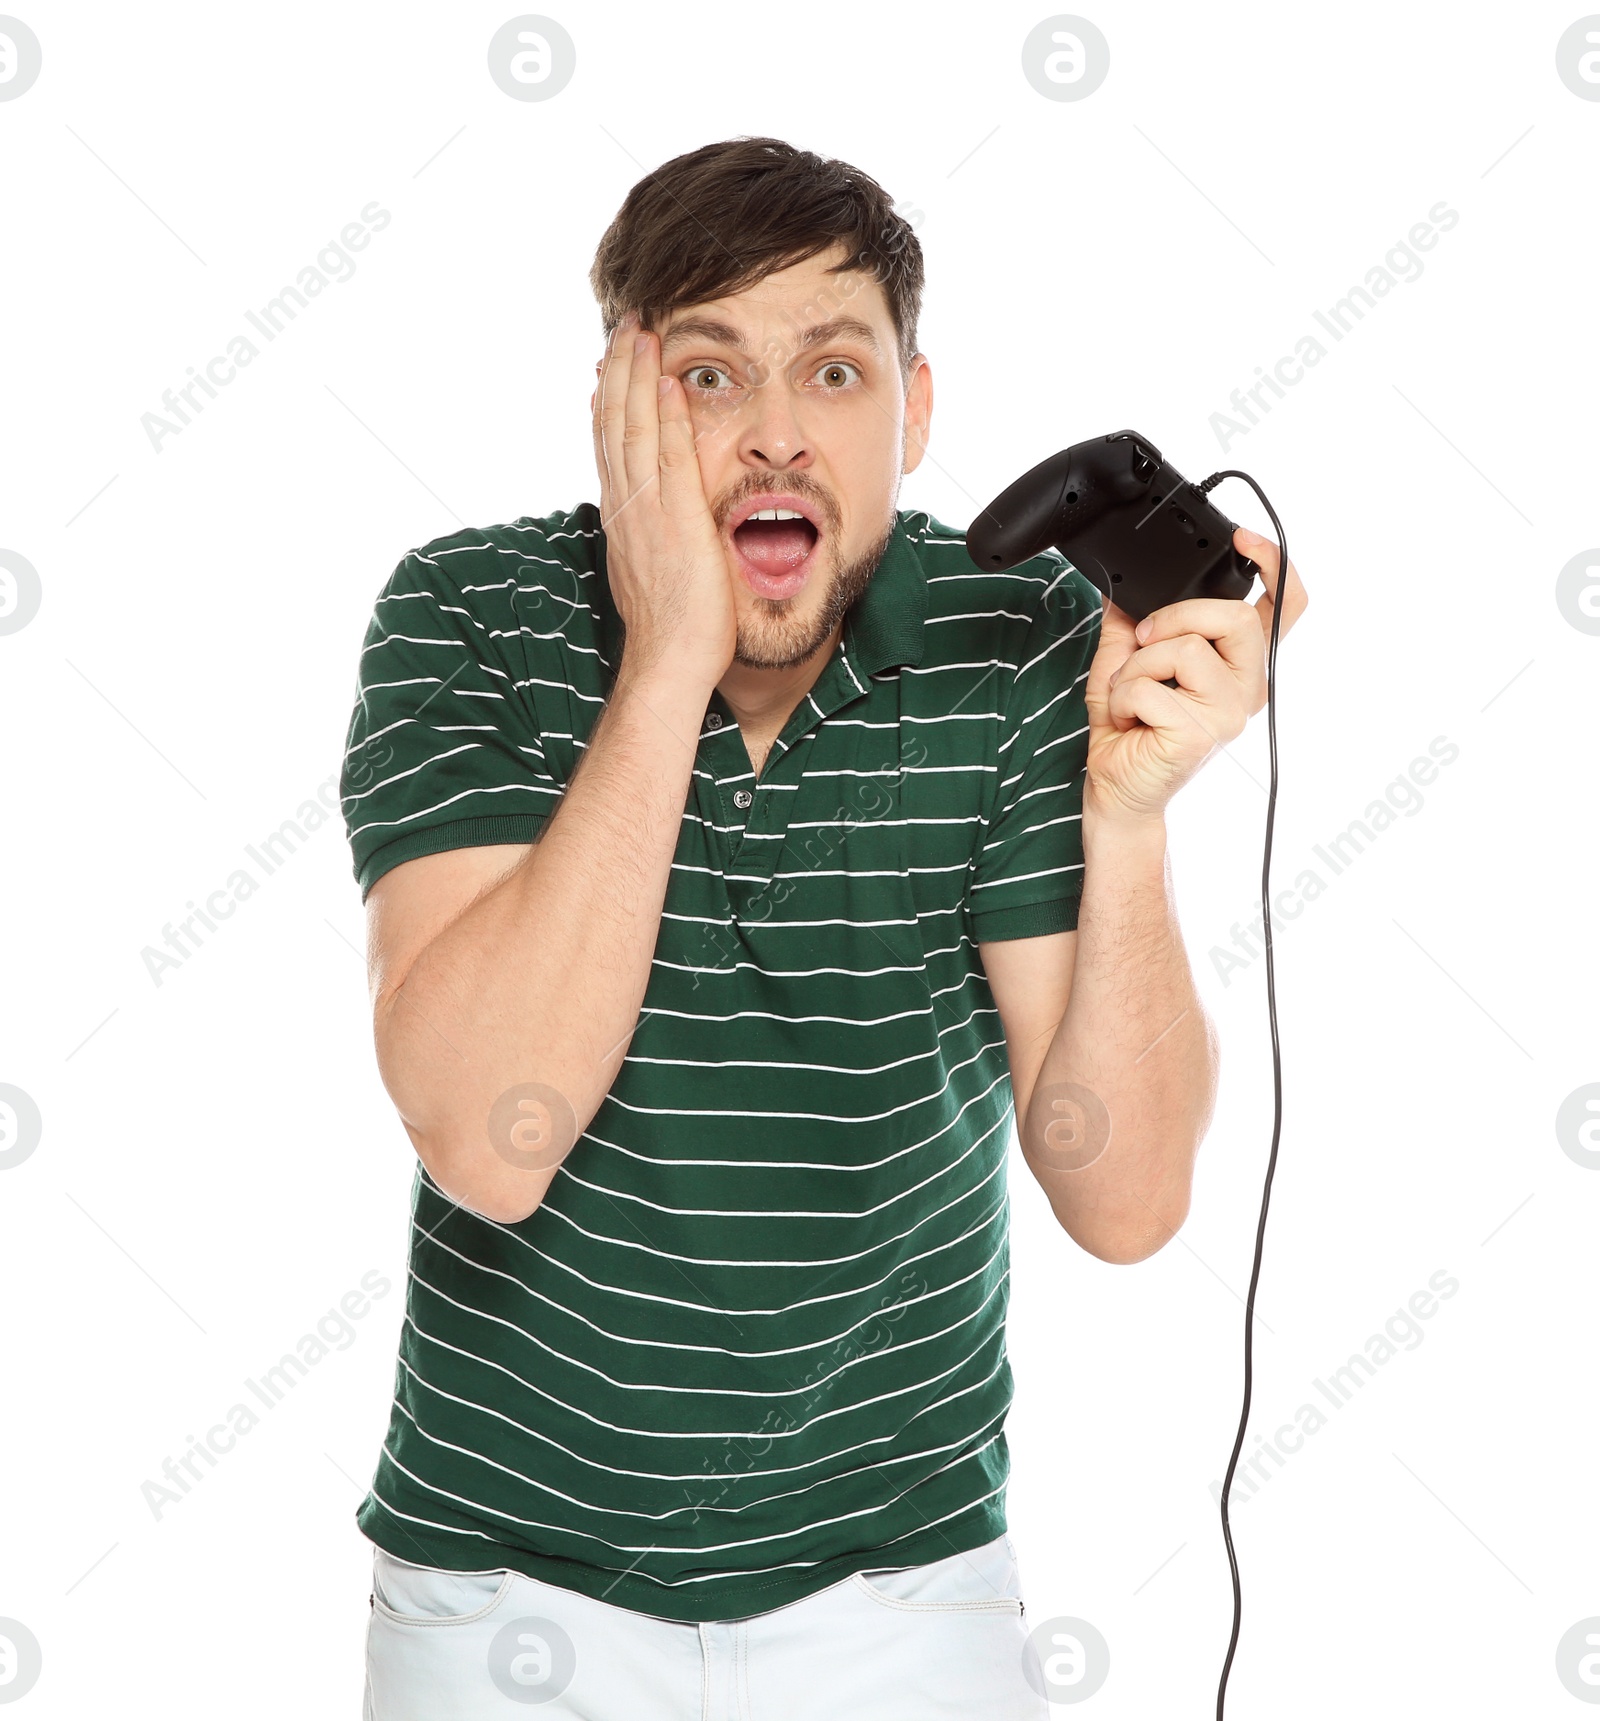 Photo of Emotional man playing video games with controller isolated on white